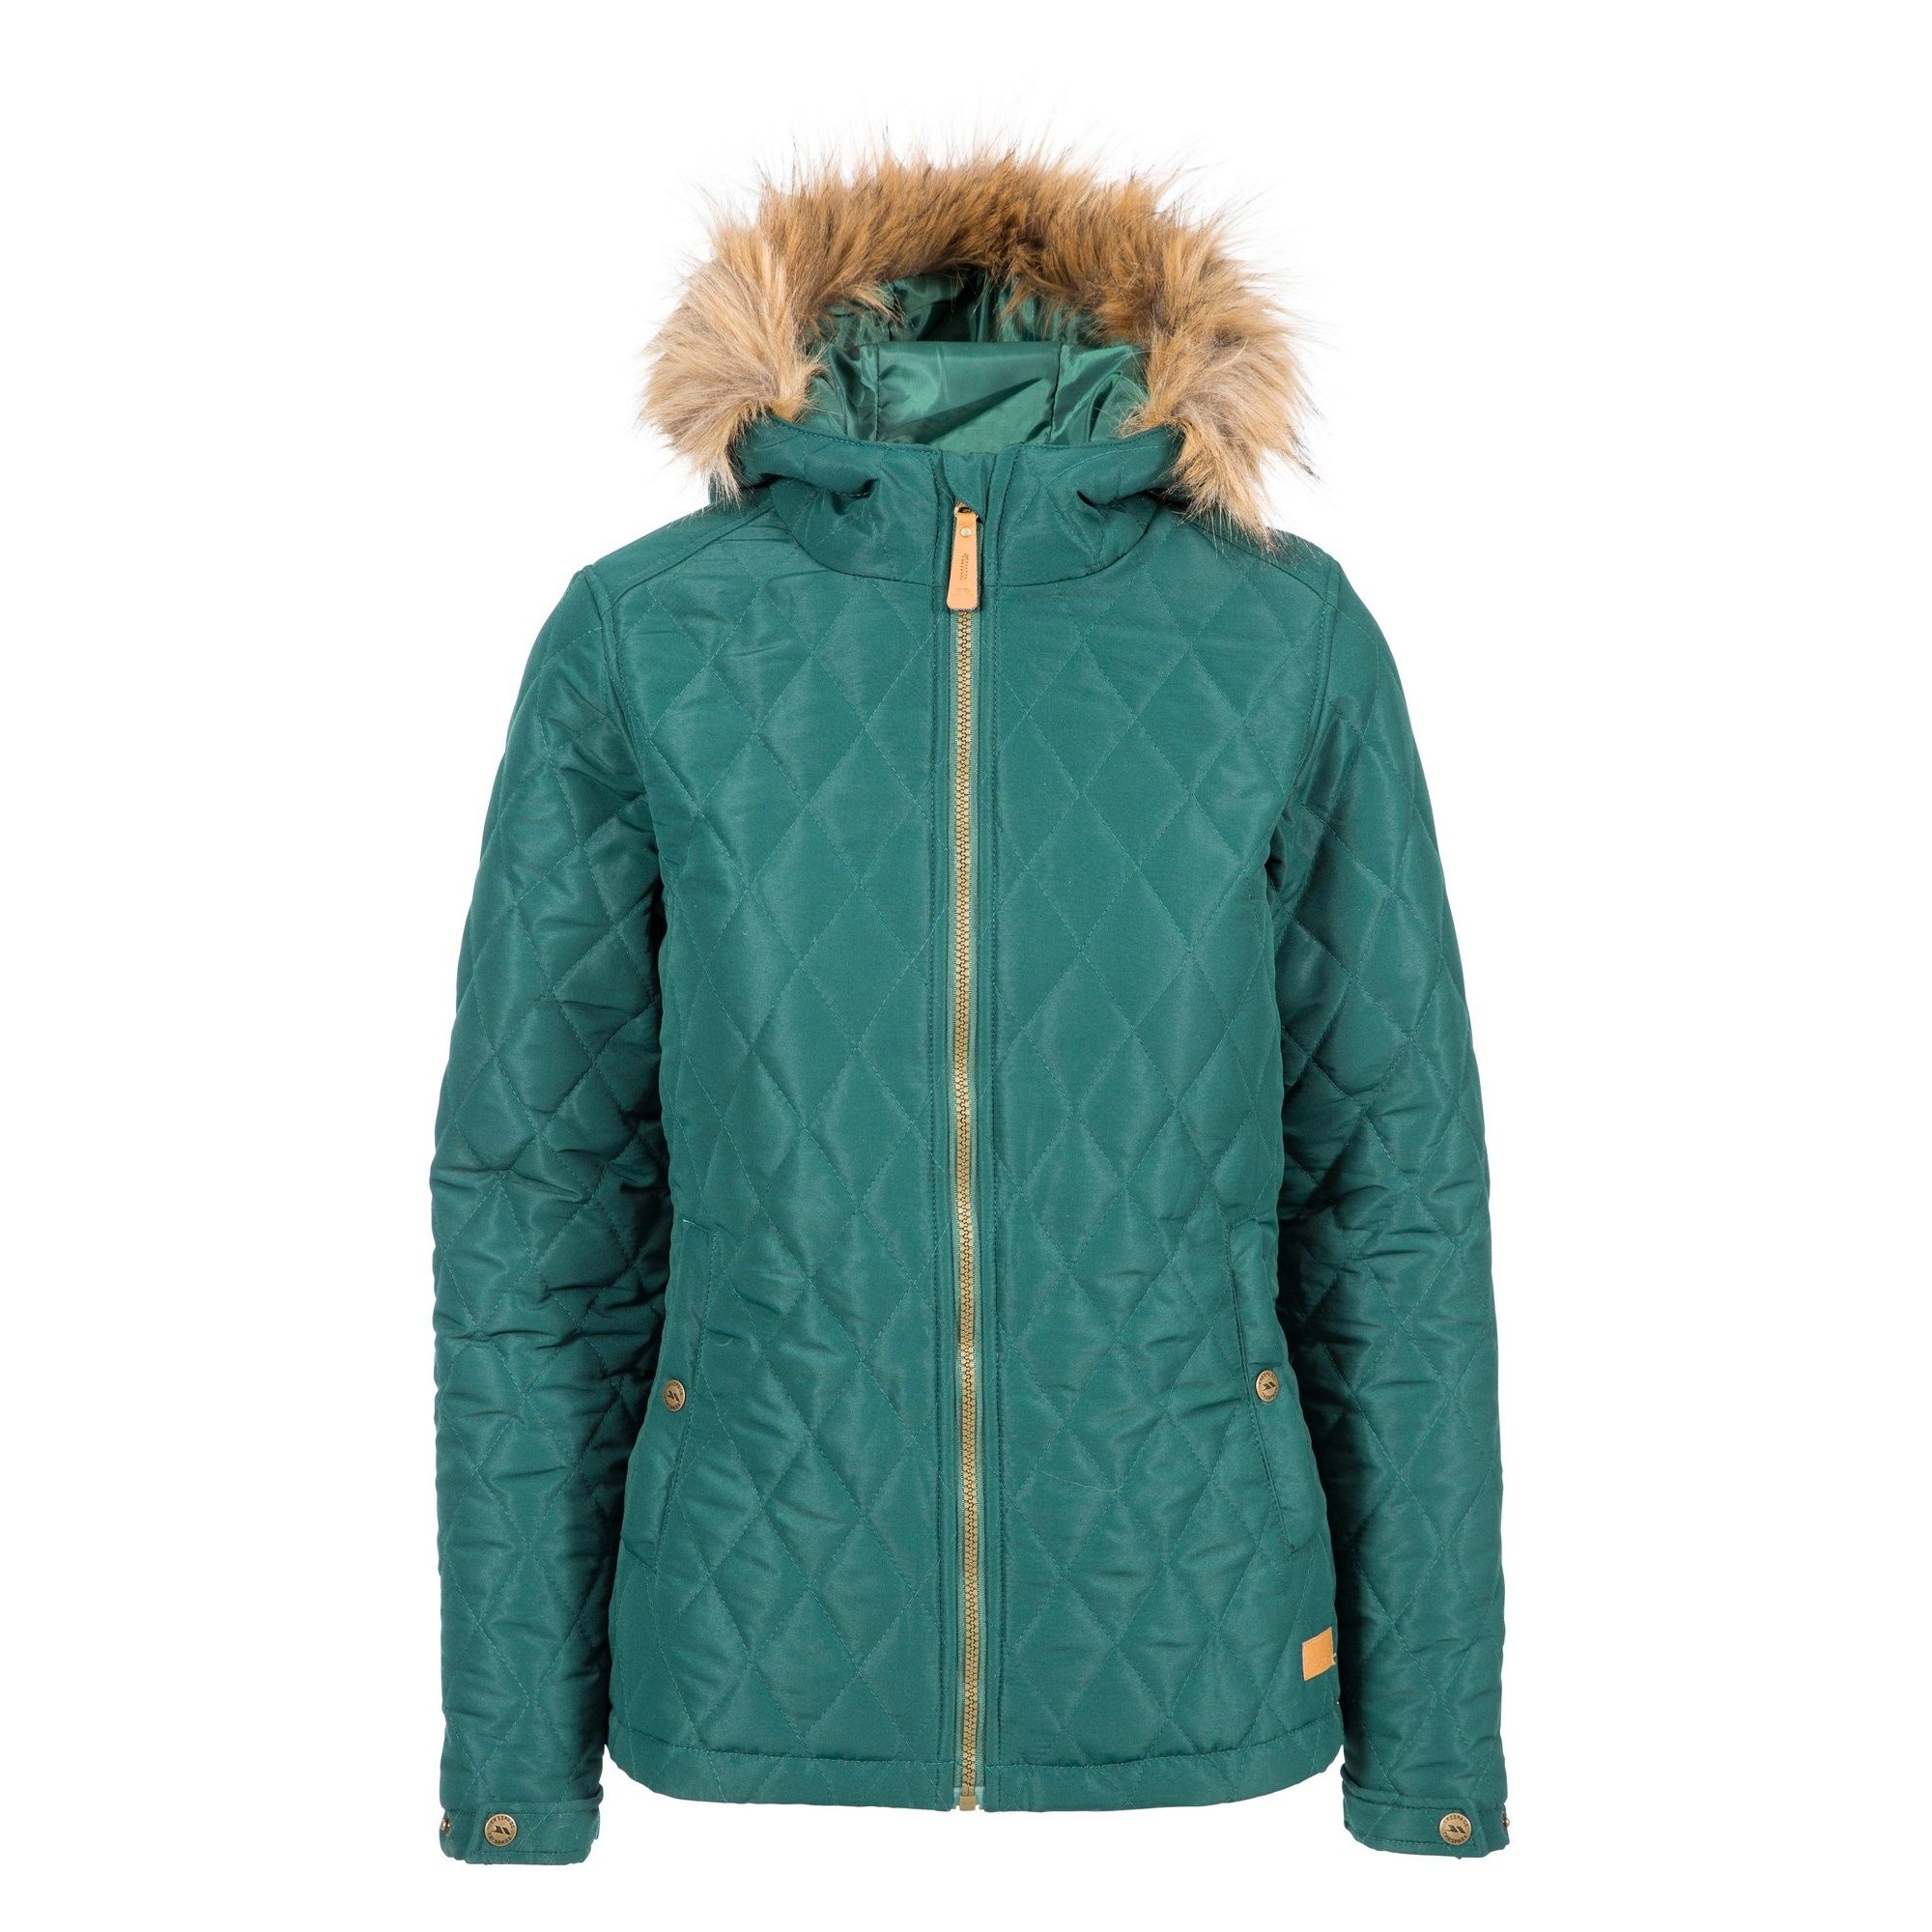 Padded. Diamond shaped quilting. 2 stud fastening waist pockets. Grown on hood with fur trim. Adjustable stud cuff. Inner storm flap. Shell: 100% Polyester, Lining: 100% Polyester, Filling: 100% Polyester. Trespass Womens Chest Sizing (approx): XS/8 - 32in/81cm, S/10 - 34in/86cm, M/12 - 36in/91.4cm, L/14 - 38in/96.5cm, XL/16 - 40in/101.5cm, XXL/18 - 42in/106.5cm.